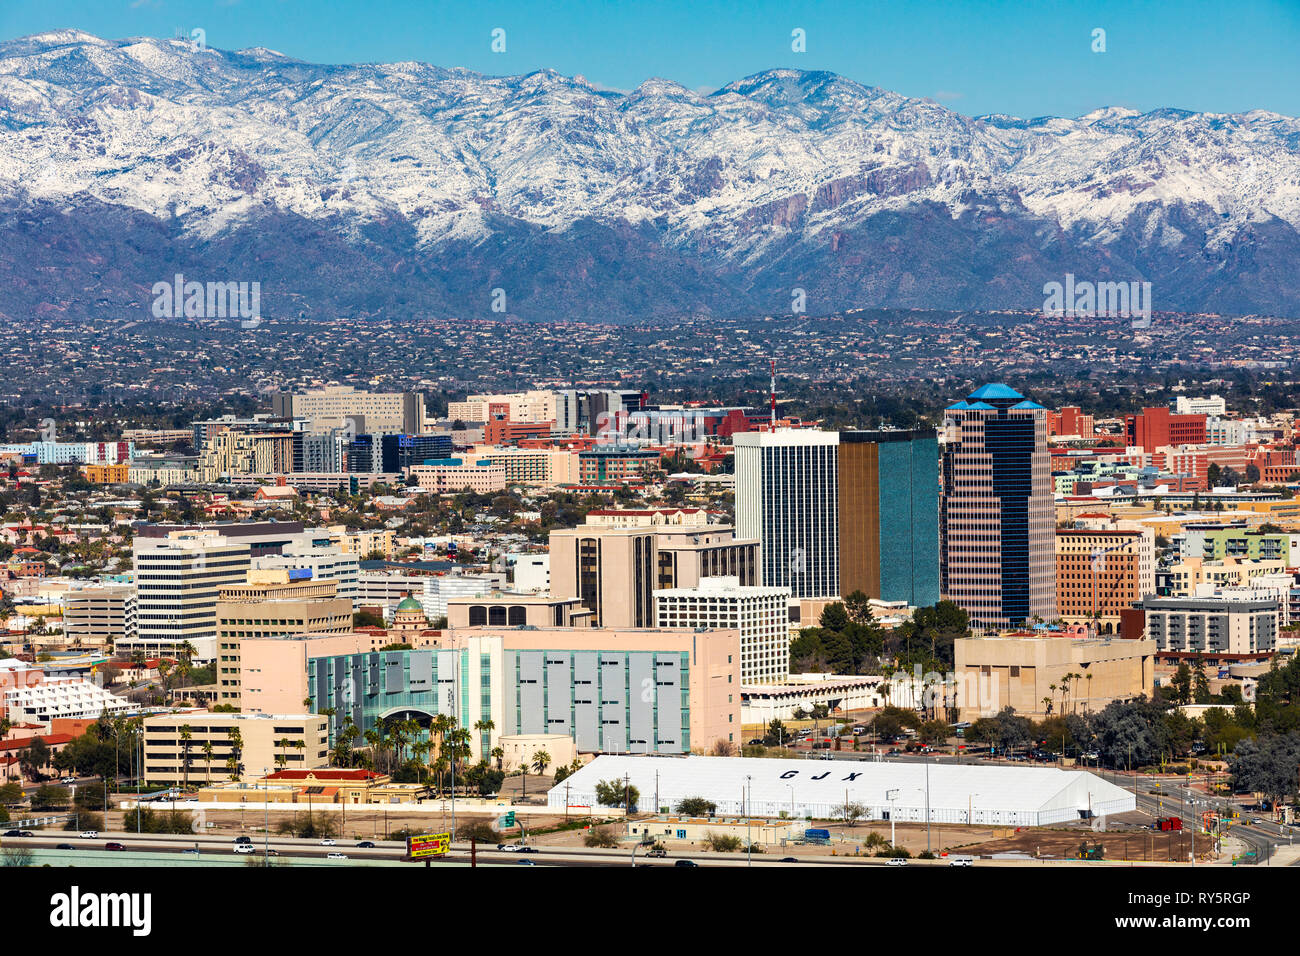 View of downtown Tucson, Arizona in winter, snow on the Santa Catalina Mountains in the distance. Stock Photo